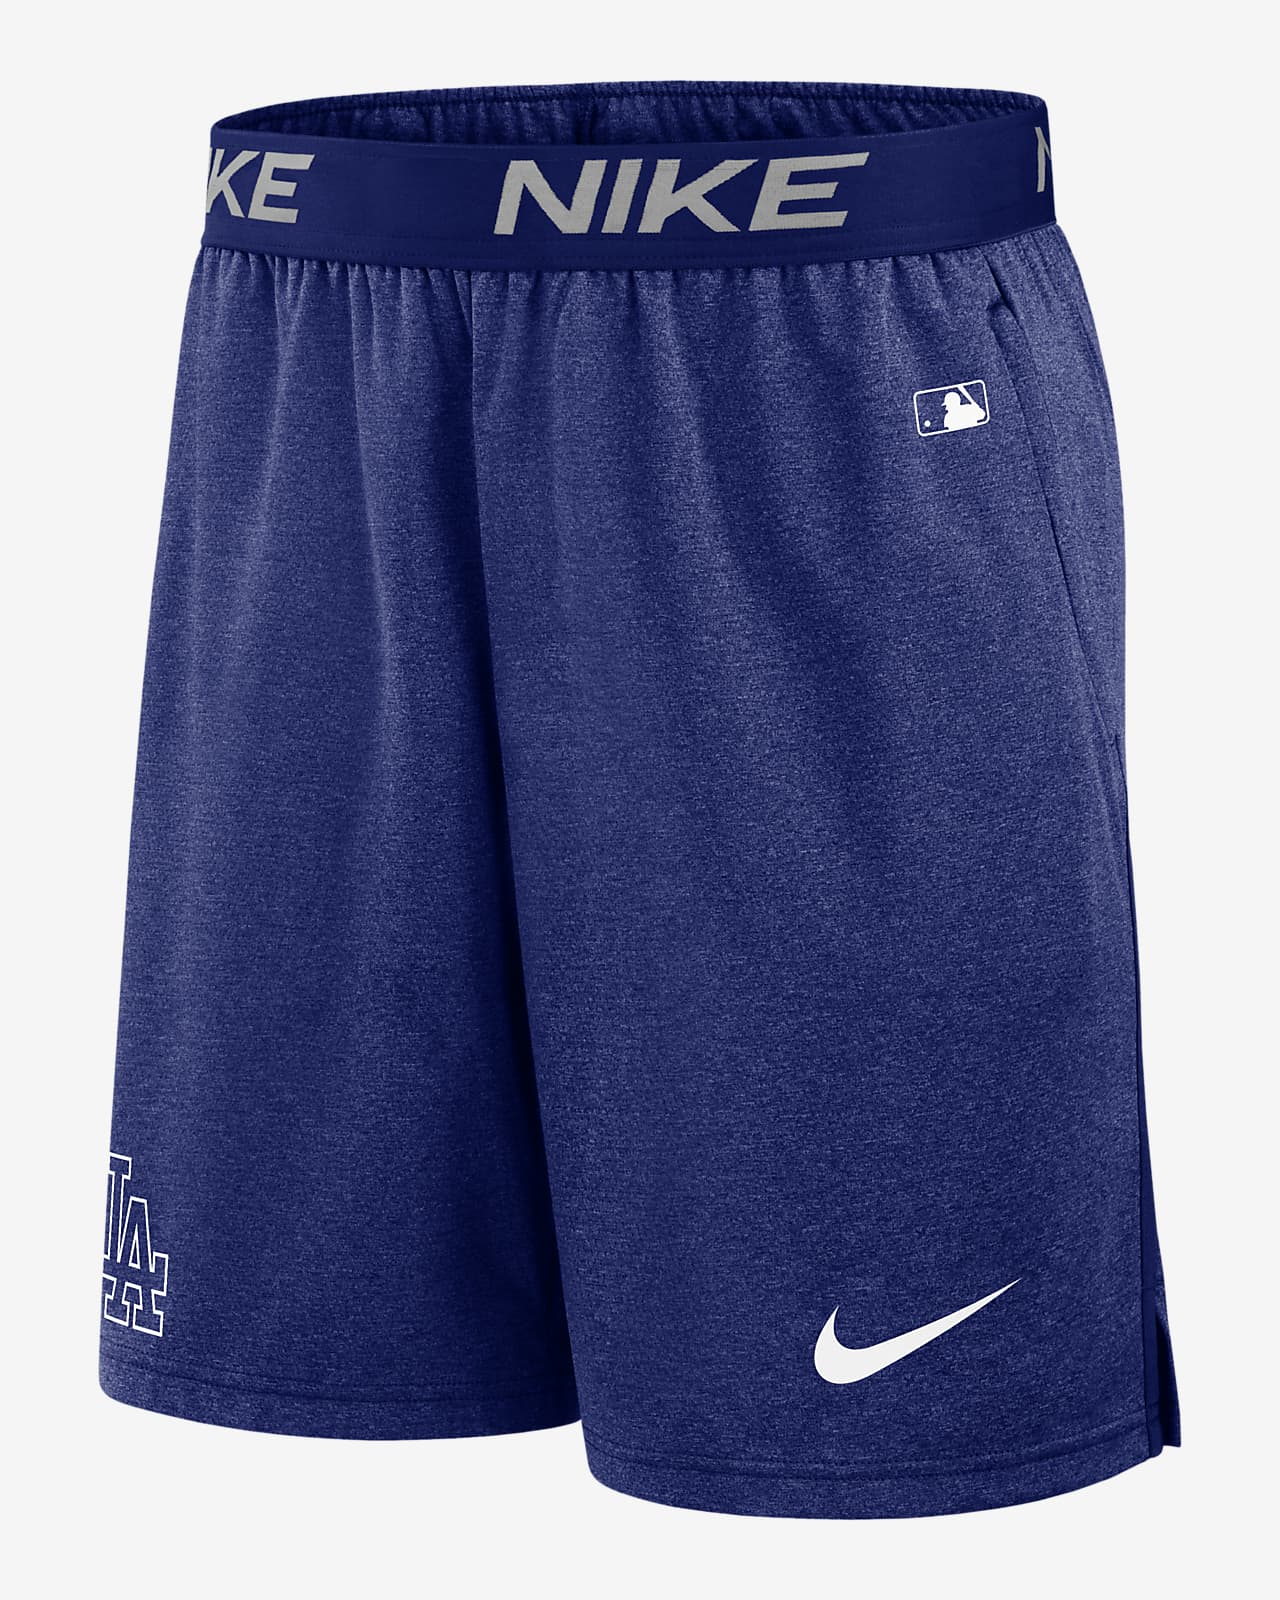 Nike NBA Authentics Compression Shorts Men's Blue New with Tags 2XLT 071 -  Locker Room Direct